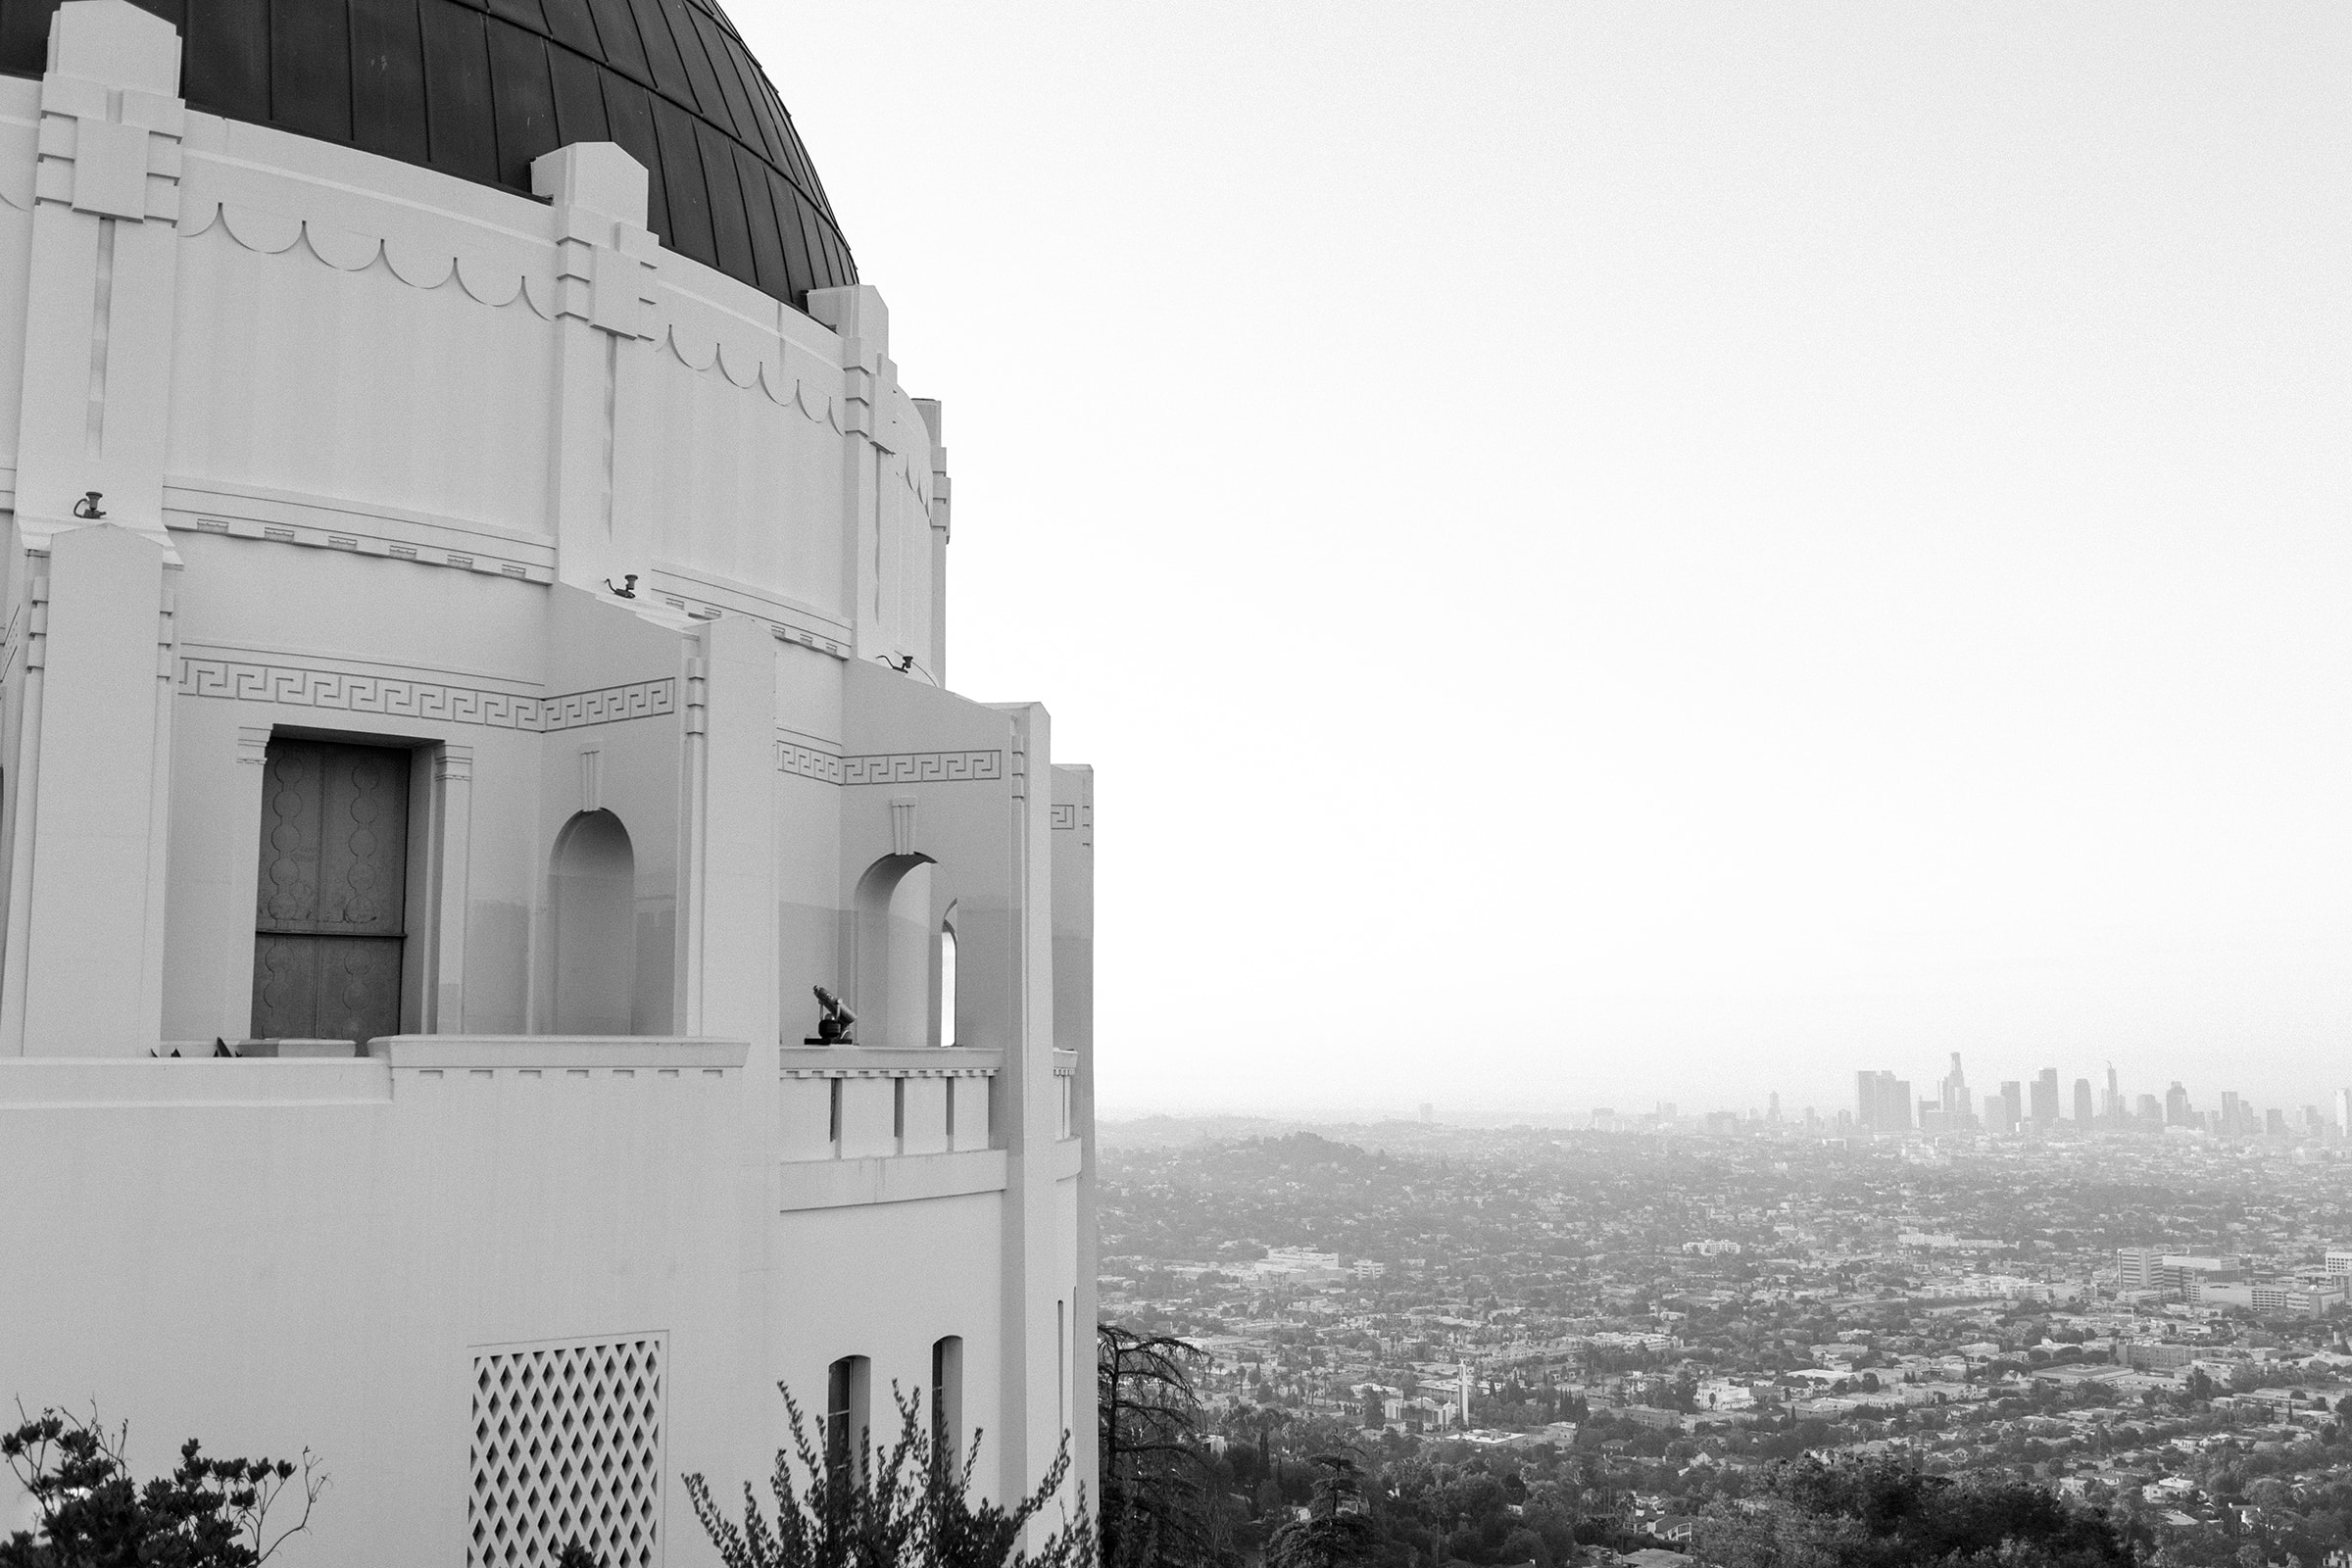 Griffith observatory views from the main deck